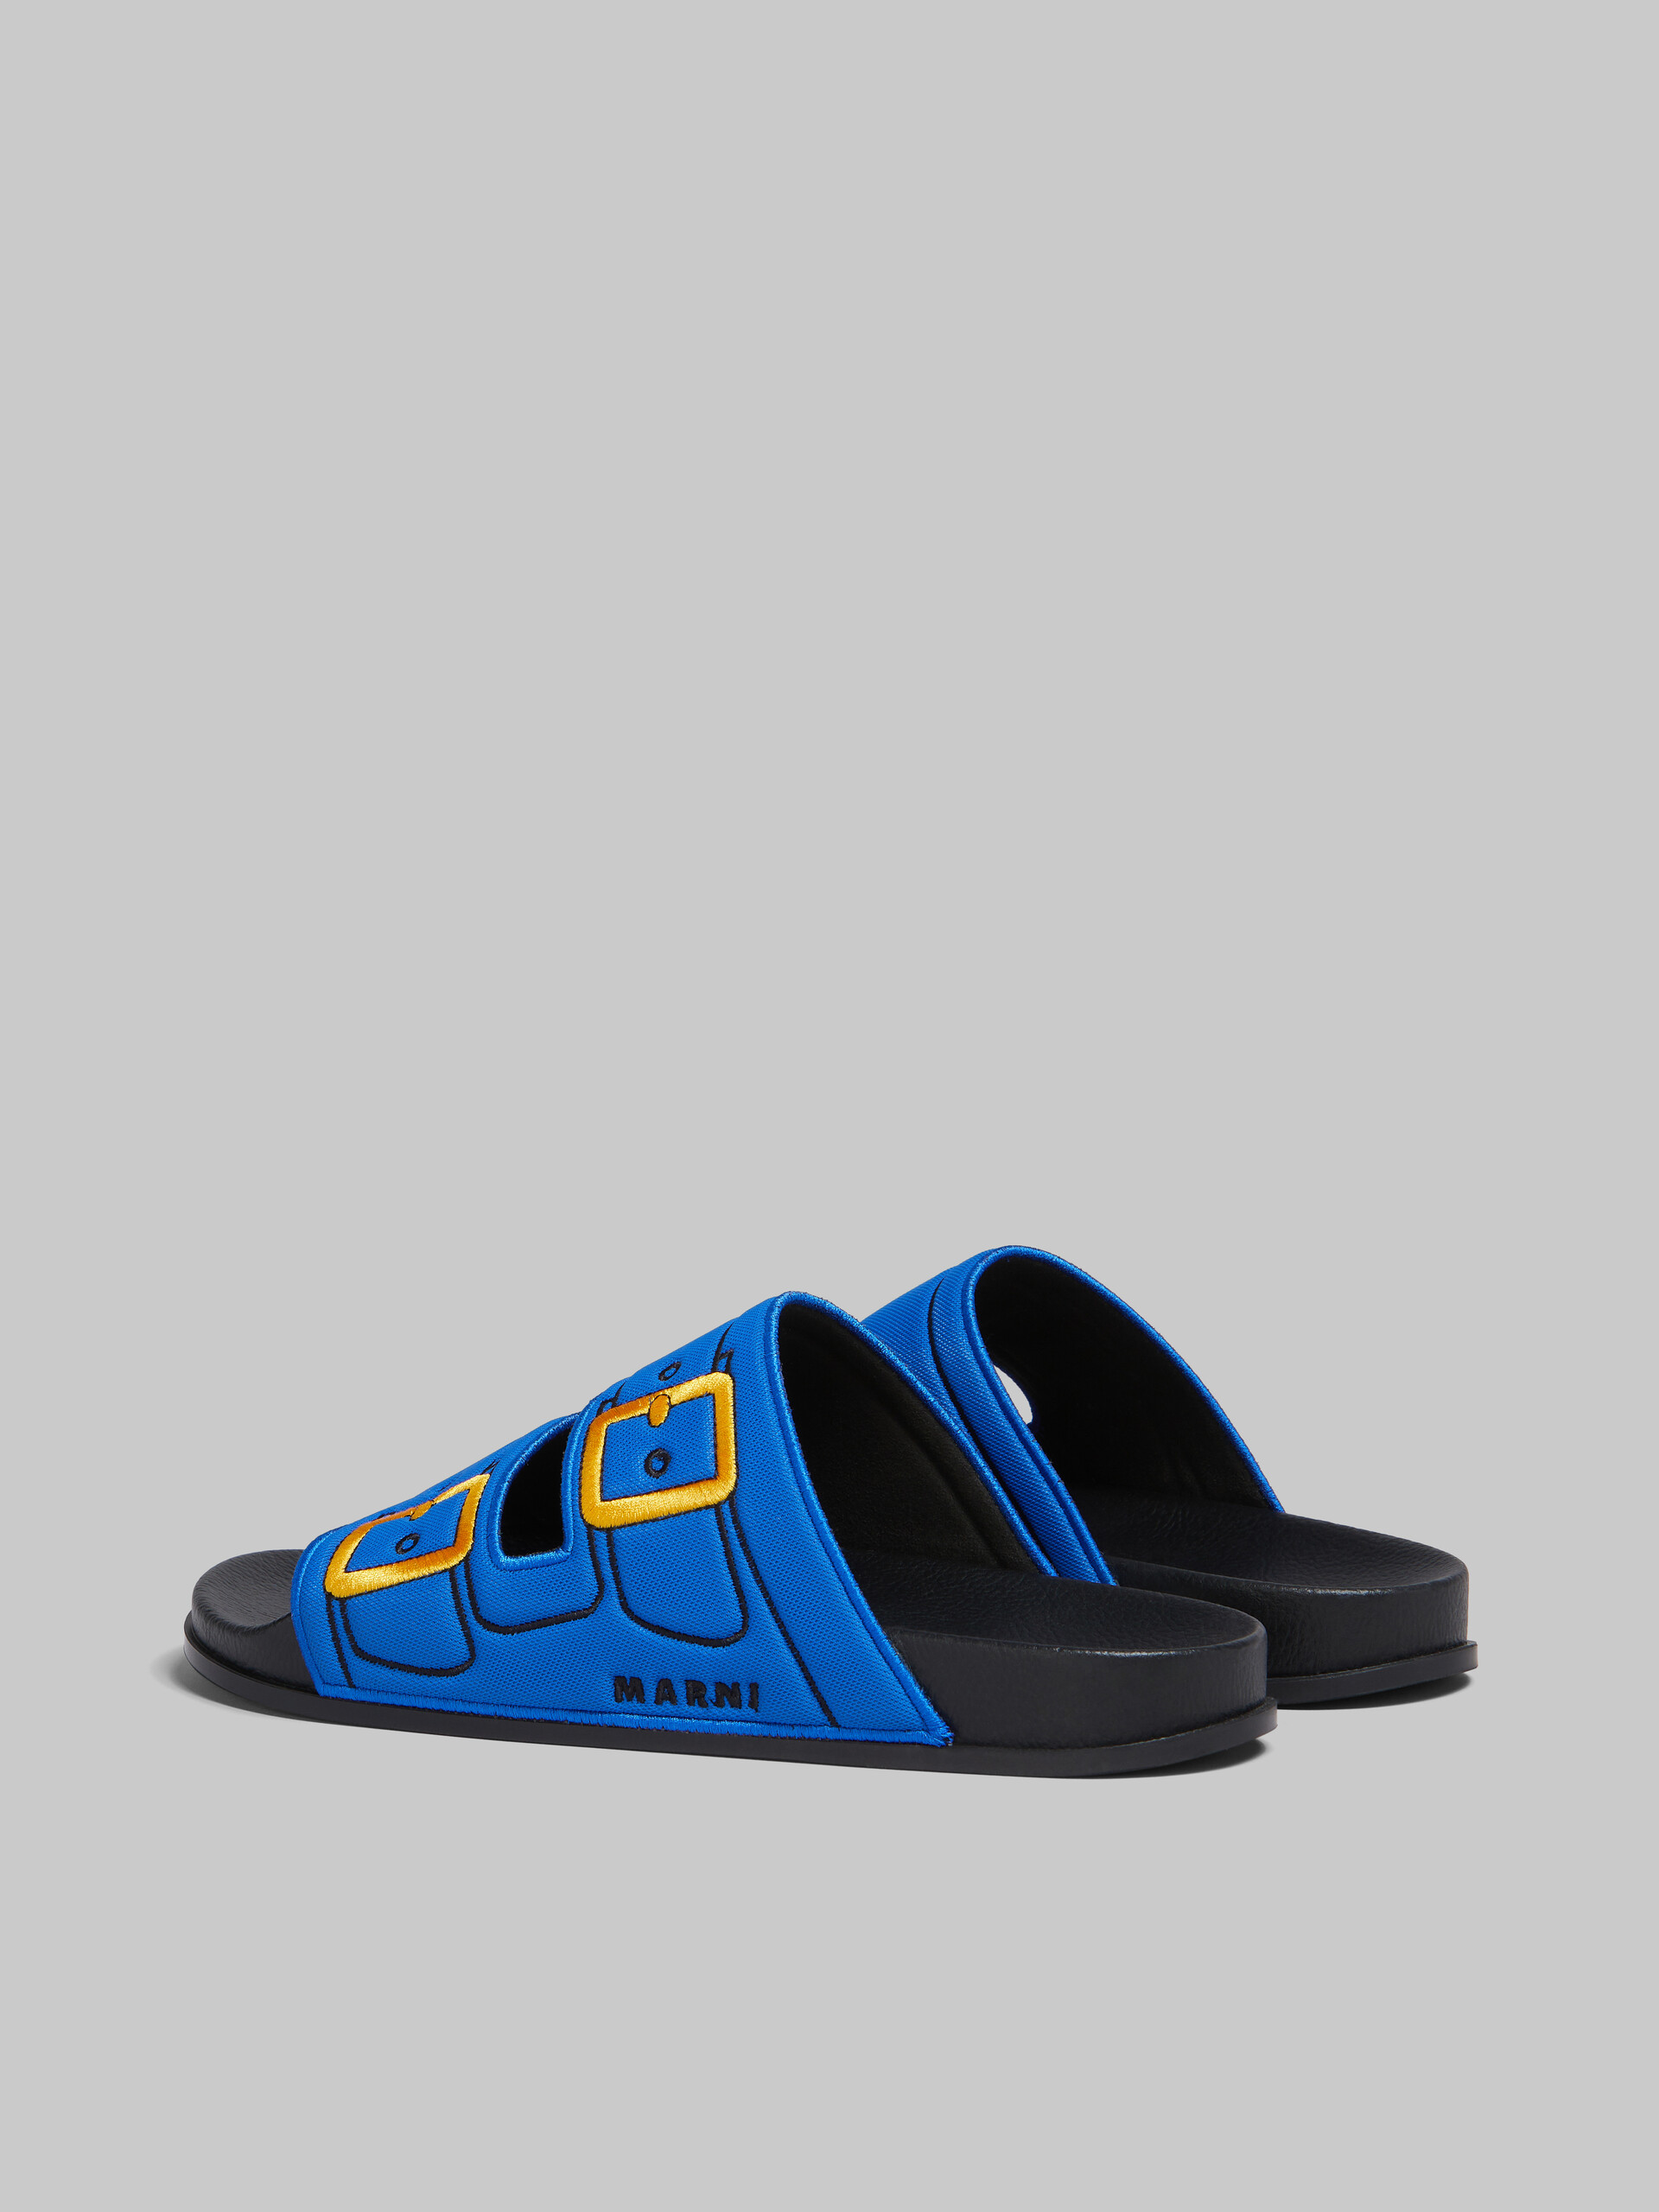 Blue trompe l'oeil slider with embroidered buckles - Sandals - Image 3